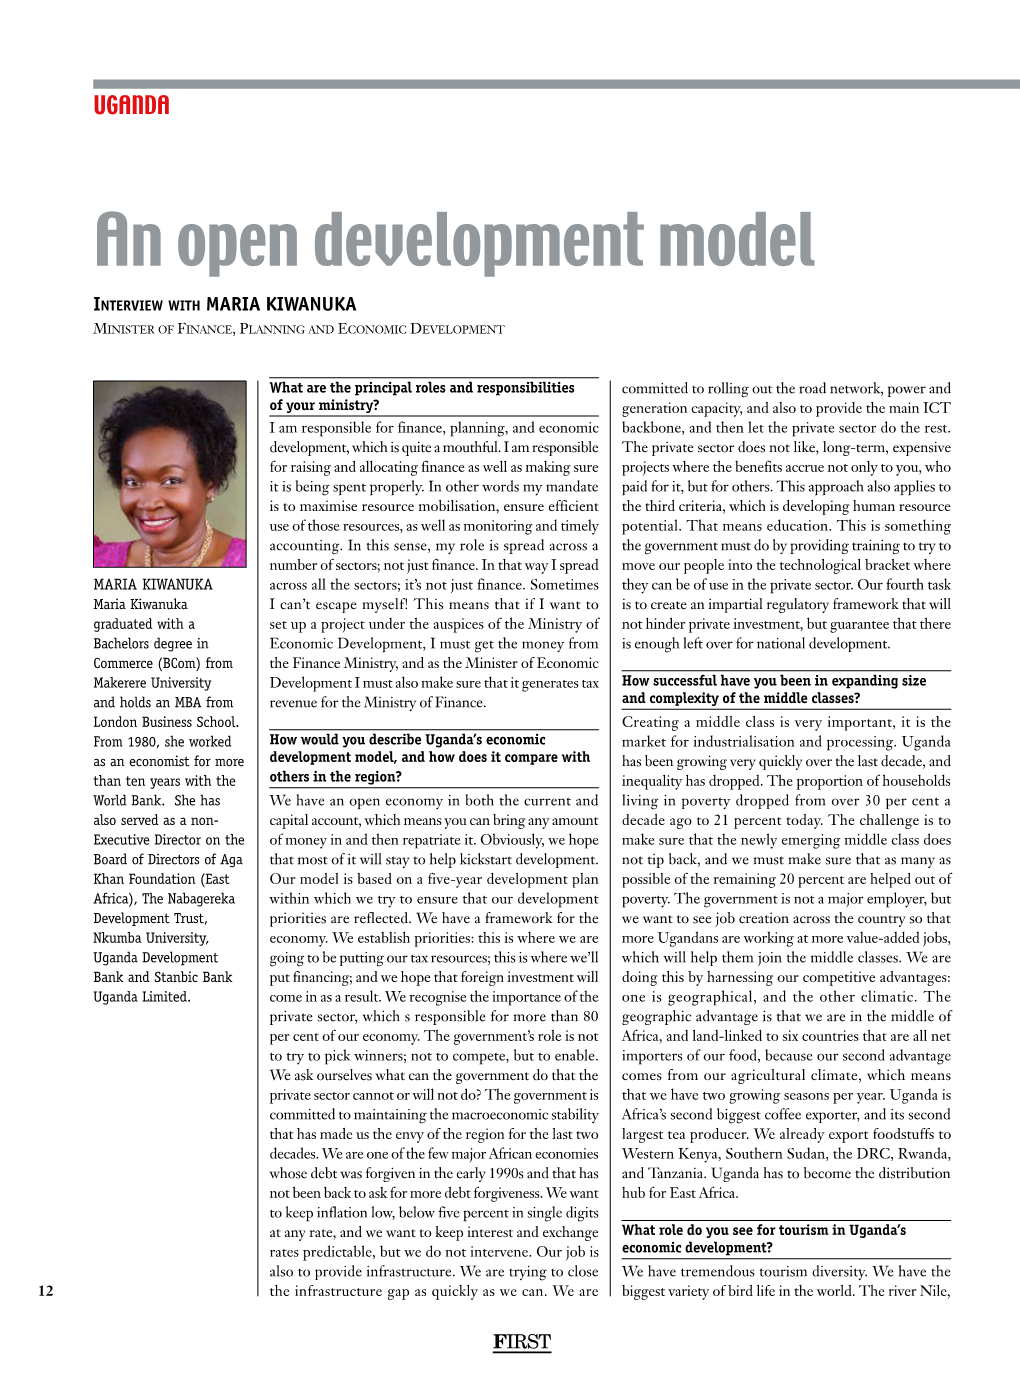 An Open Development Model Interview with MARIA KIWANUKA Minister of Finance, Planning and Economic Development